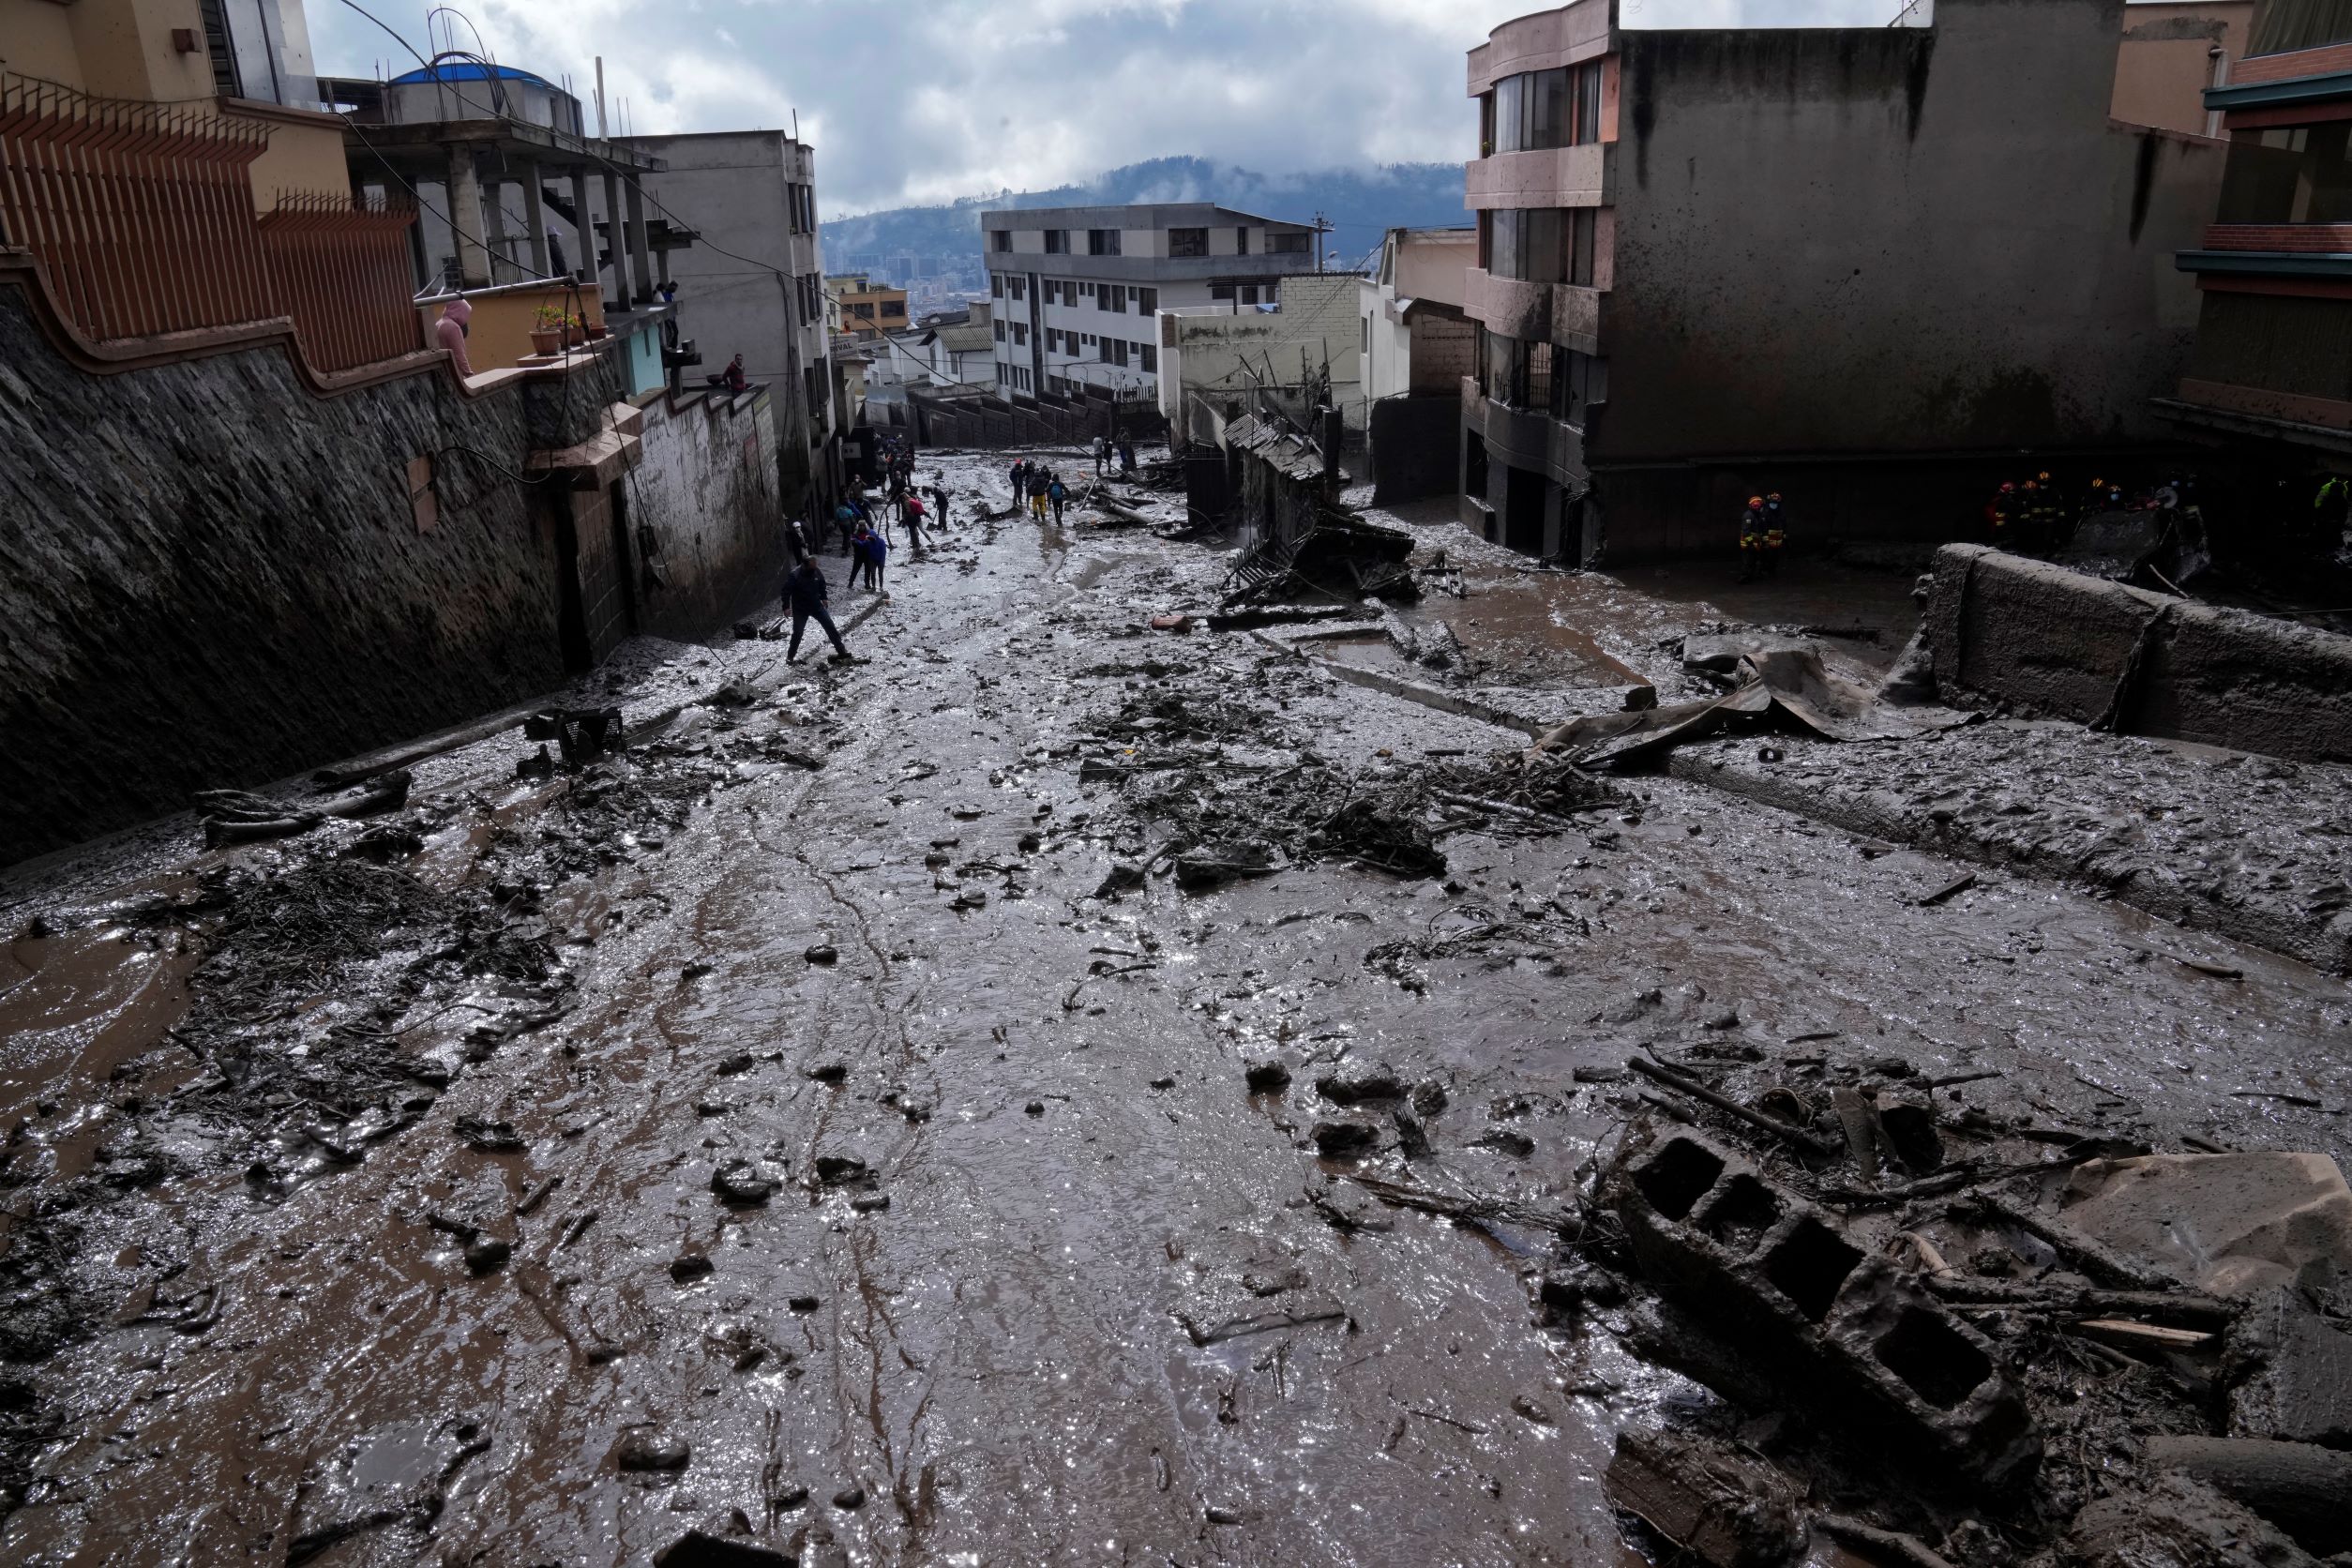 The street after the collapse of the hillside in the rain